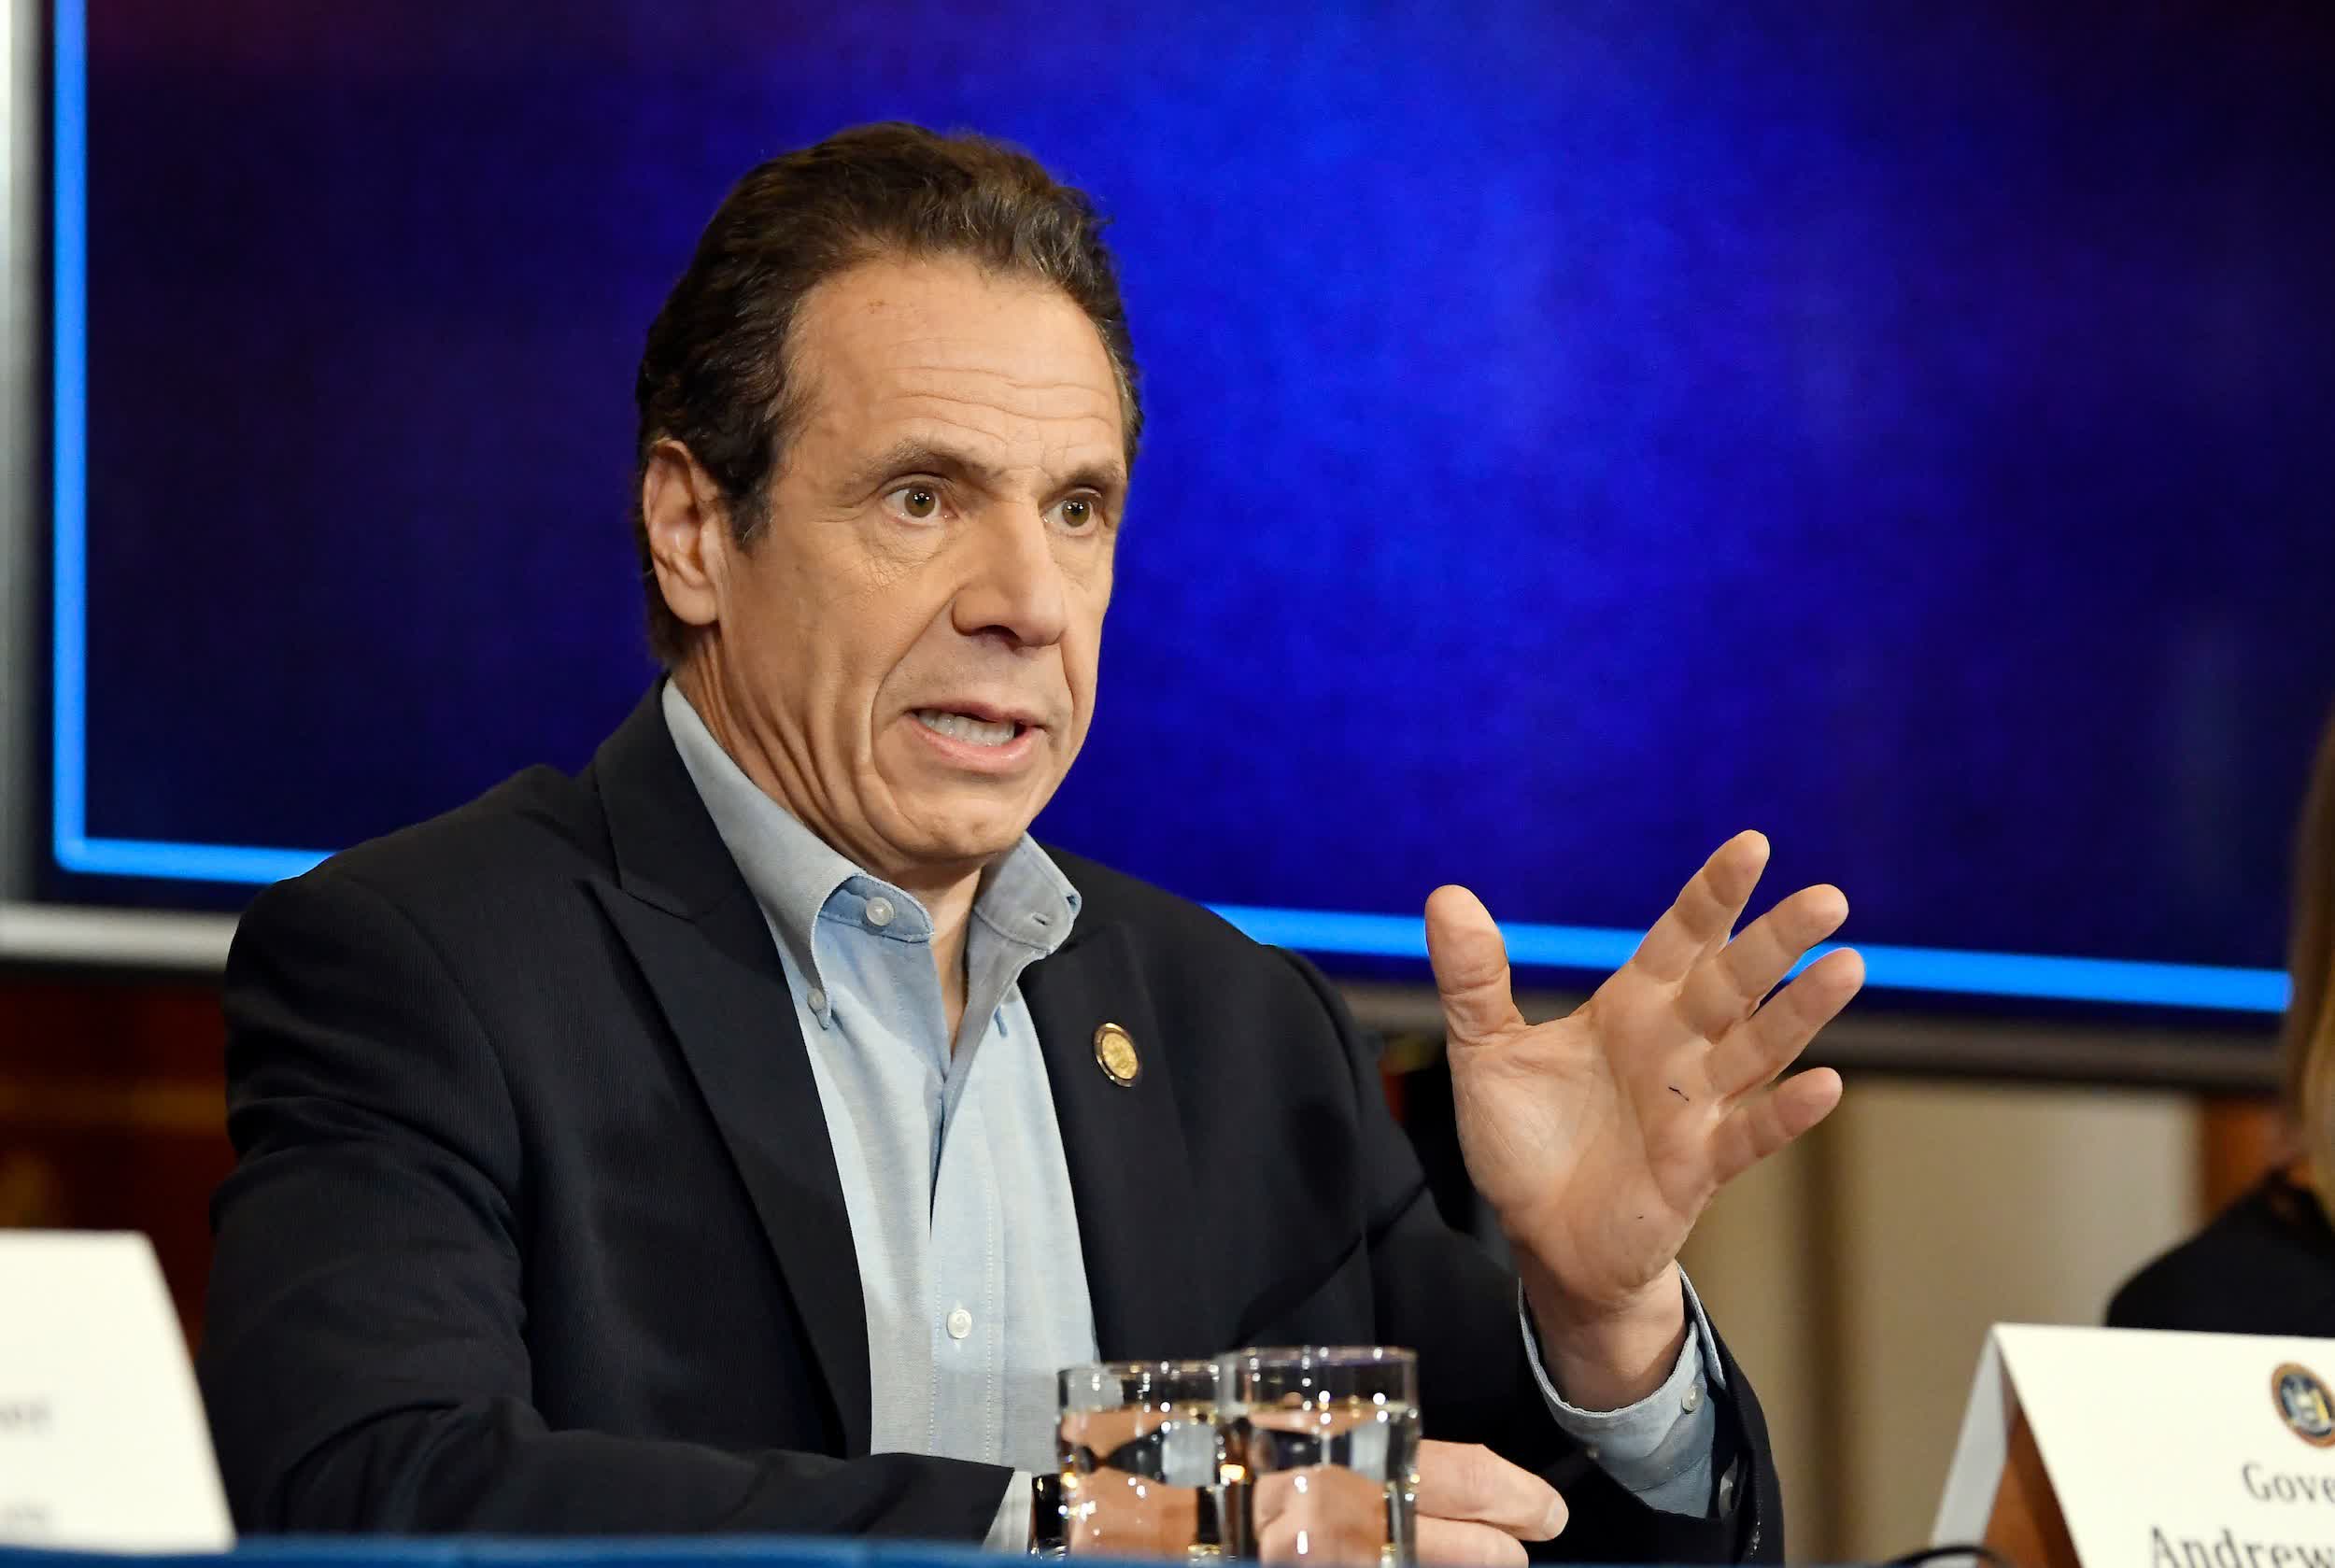 New York's new low-income broadband law is already under fire by Big Telecom